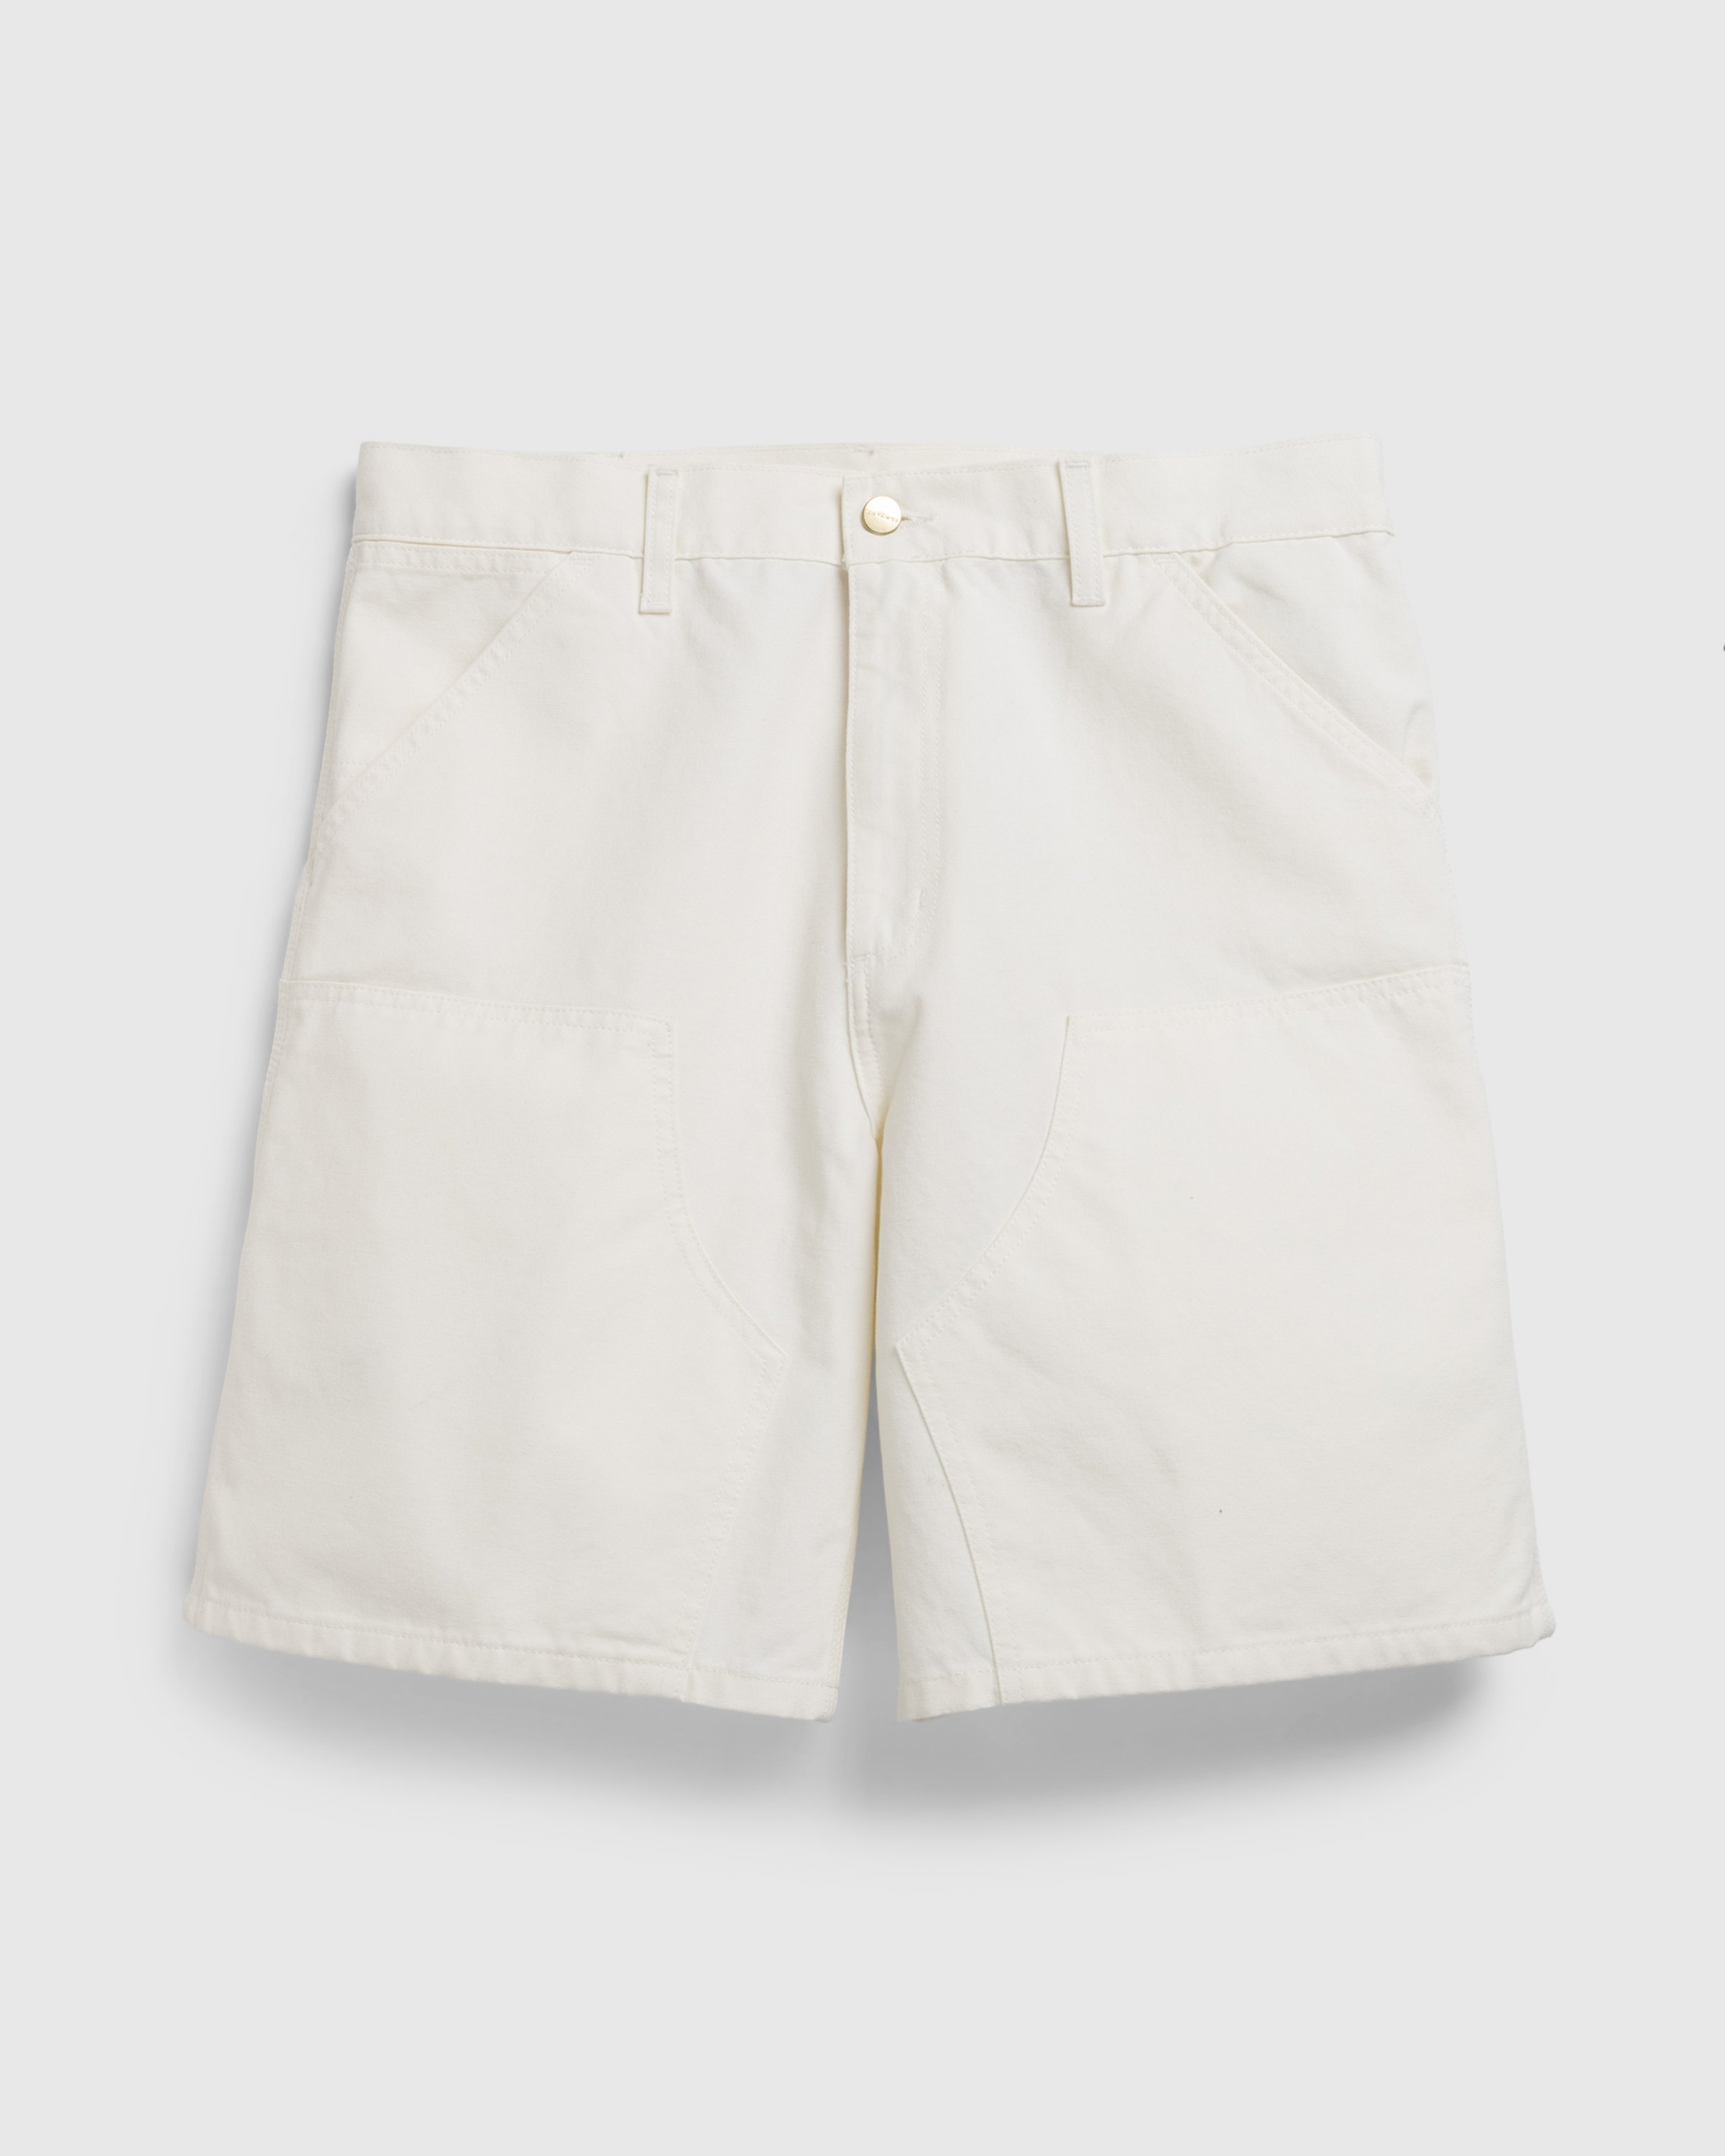 Carhartt WIP - Double Knee Short Wax /rinsed - Clothing - White - Image 1